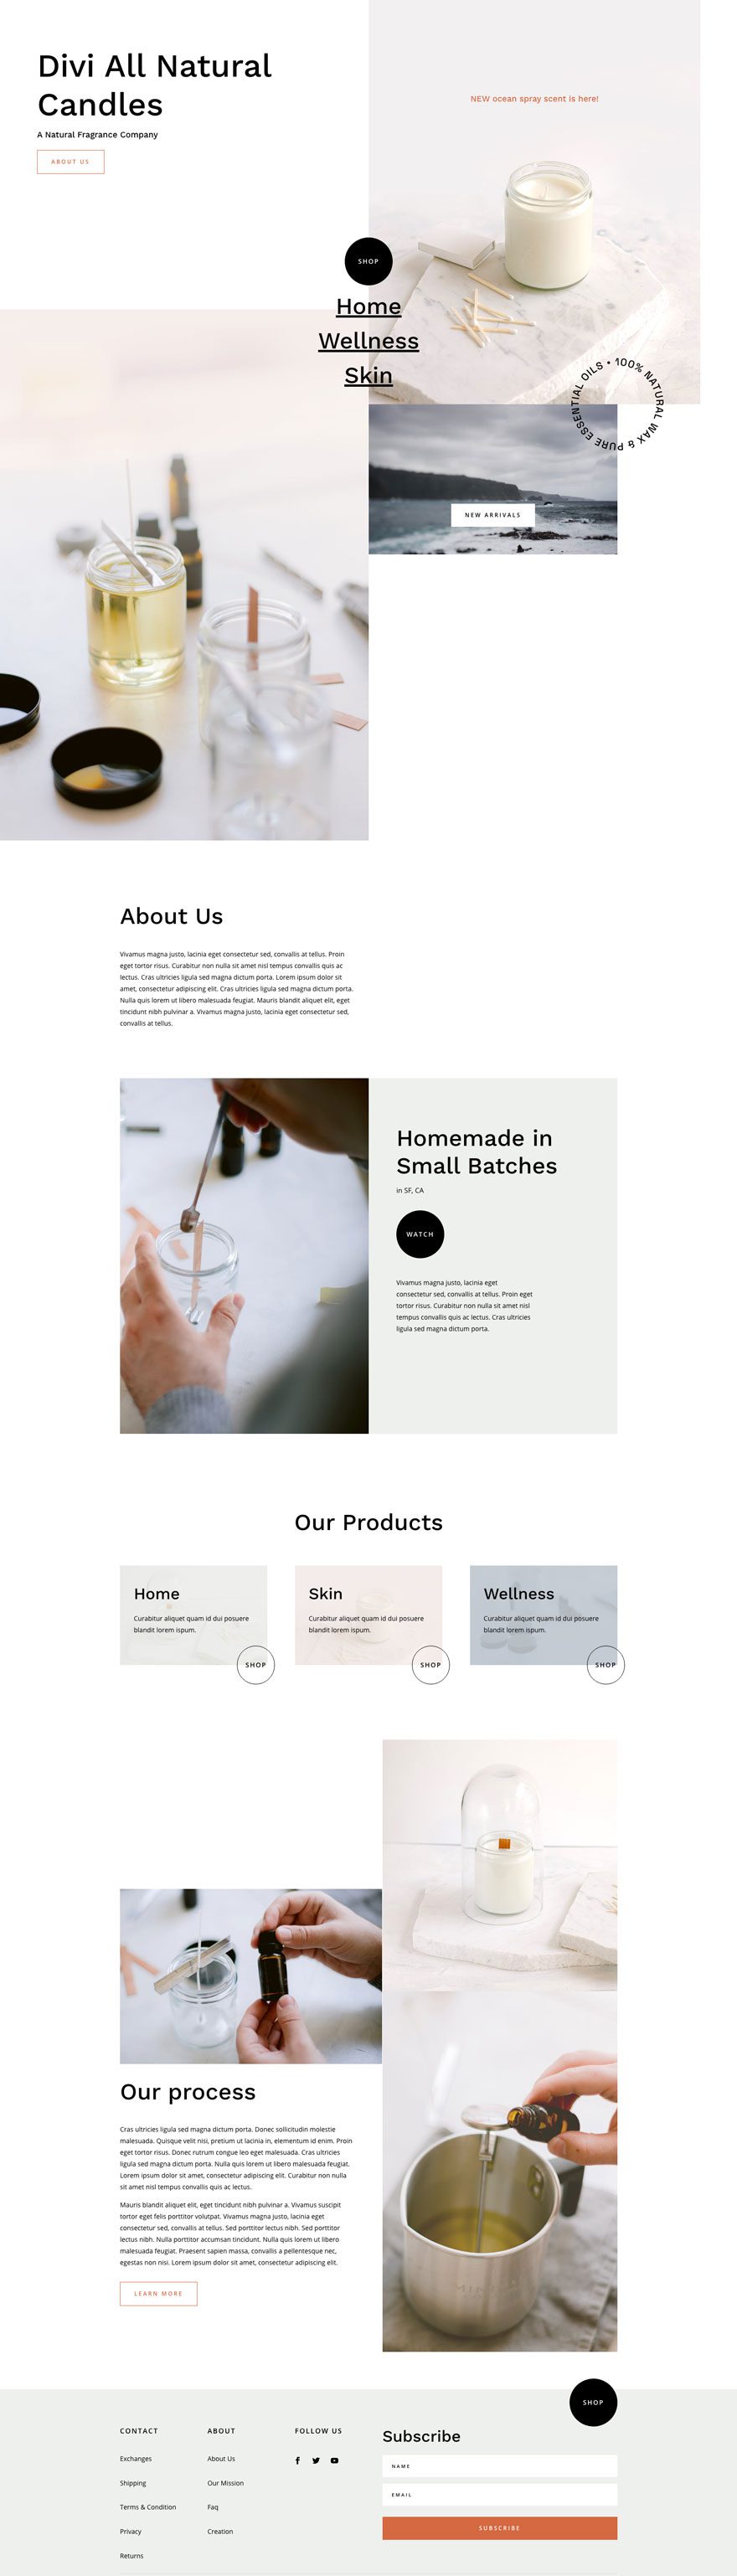 divi candle making layout pack